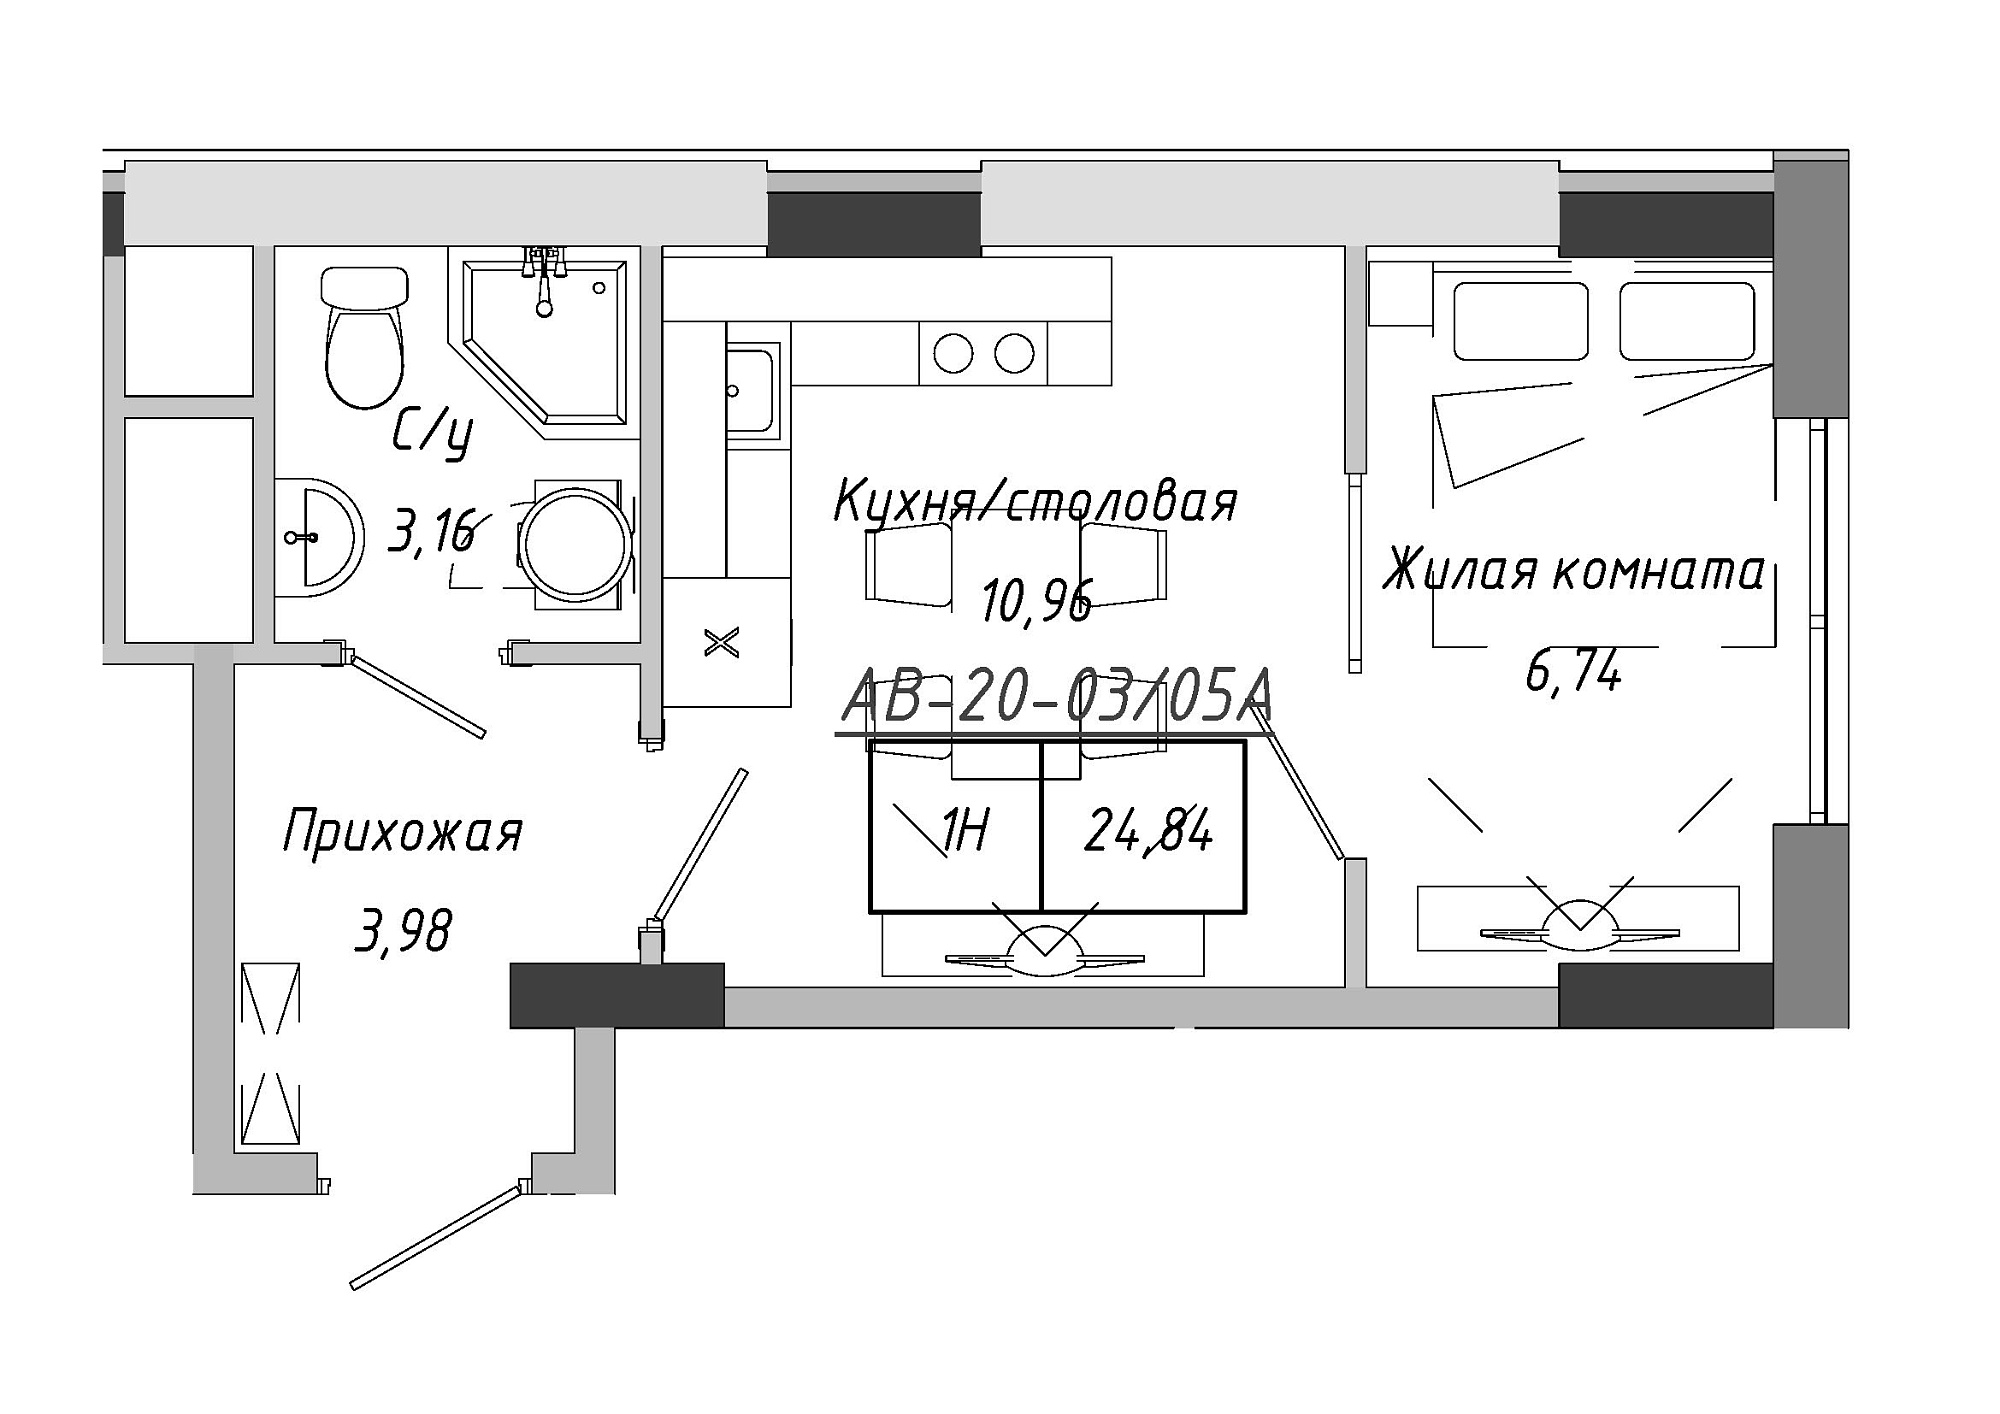 Planning 1-rm flats area 24.84m2, AB-20-03/0005а.